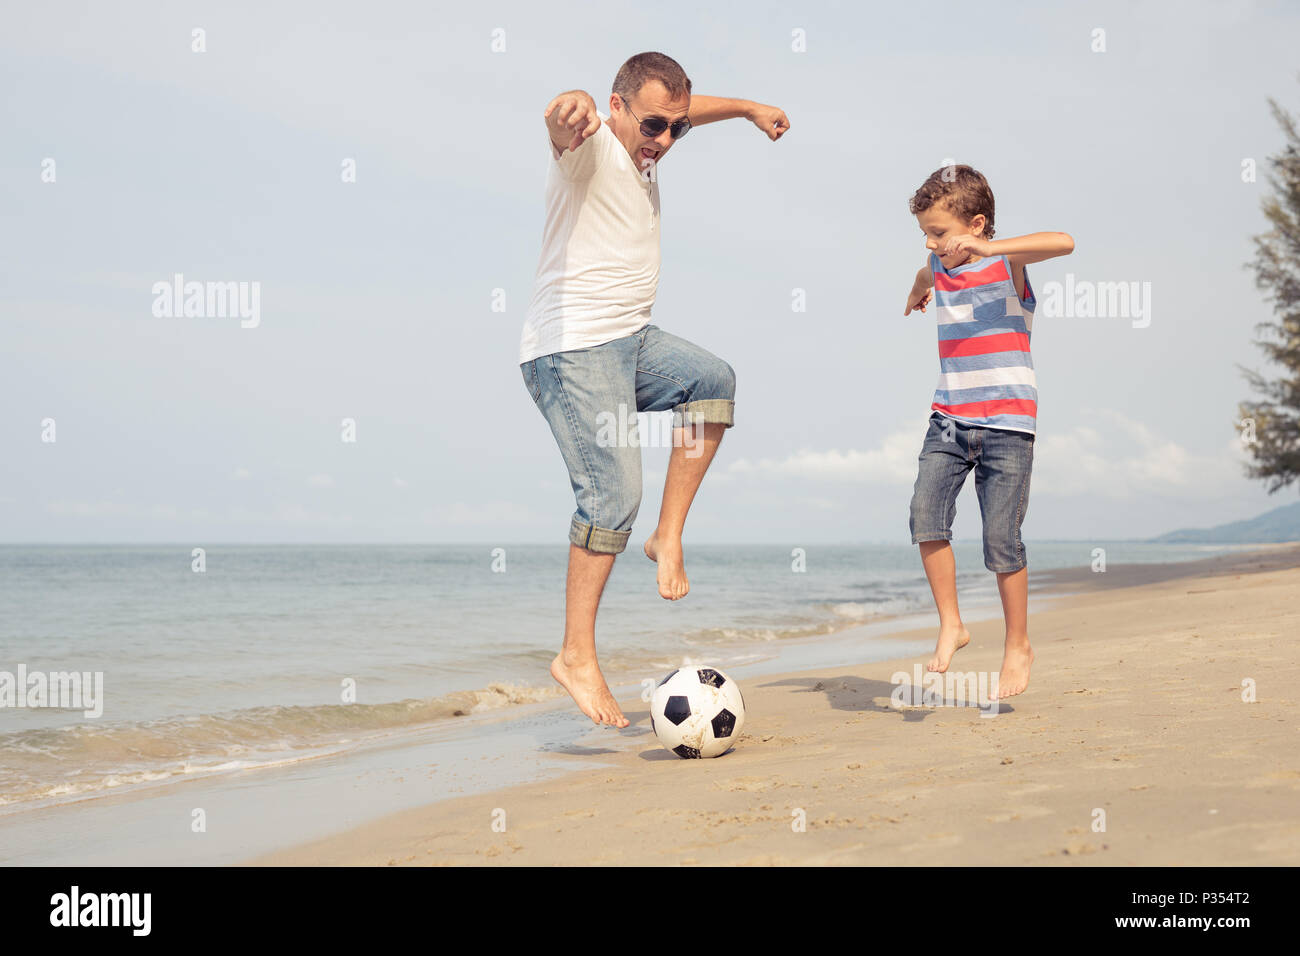 Father and son playing football on the beach at the summer day time. People having fun outdoors. Concept of friendly family. Stock Photo